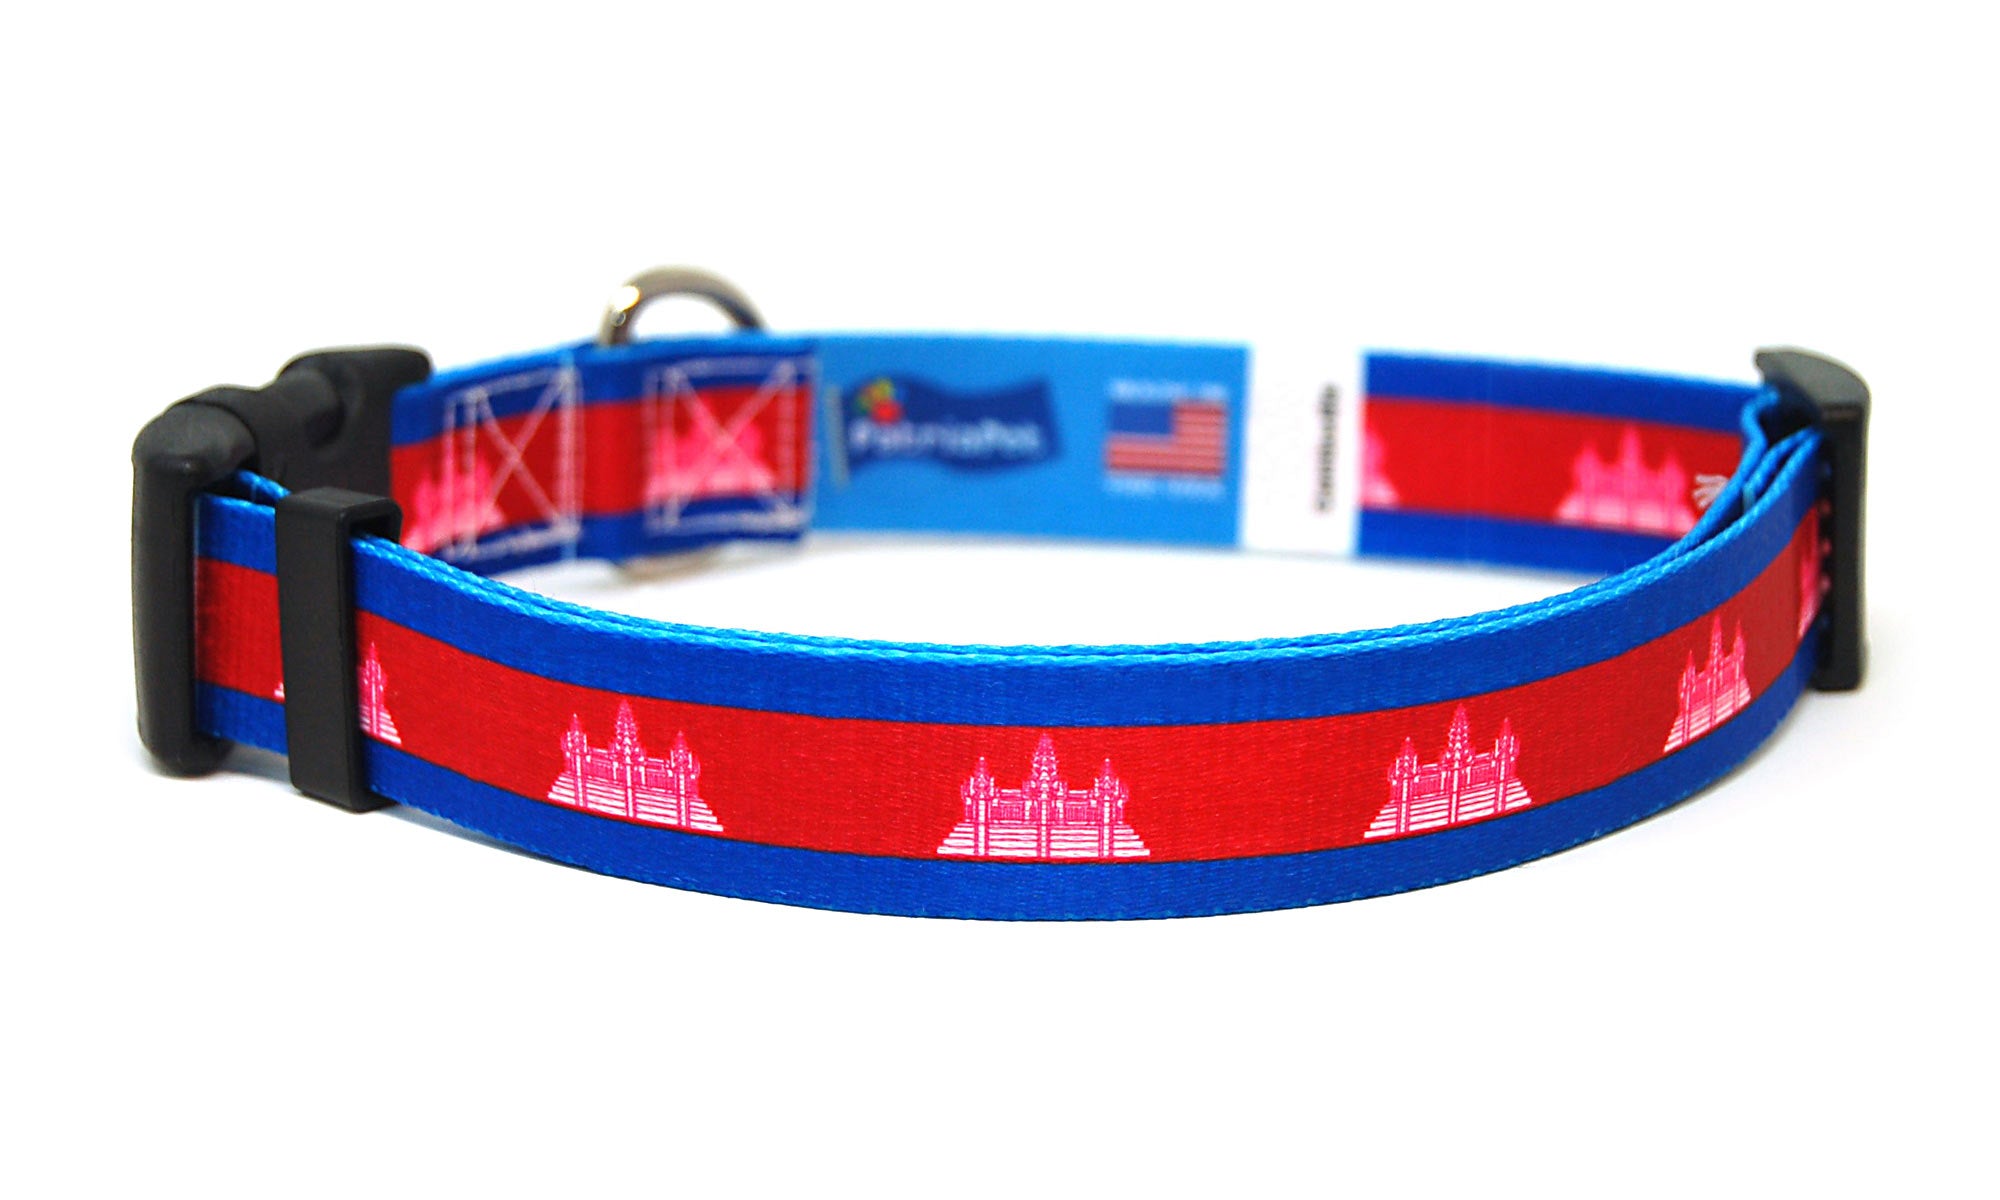 Cambodia Dog Collar | Quick Release or Martingale Style | Made in NJ, USA